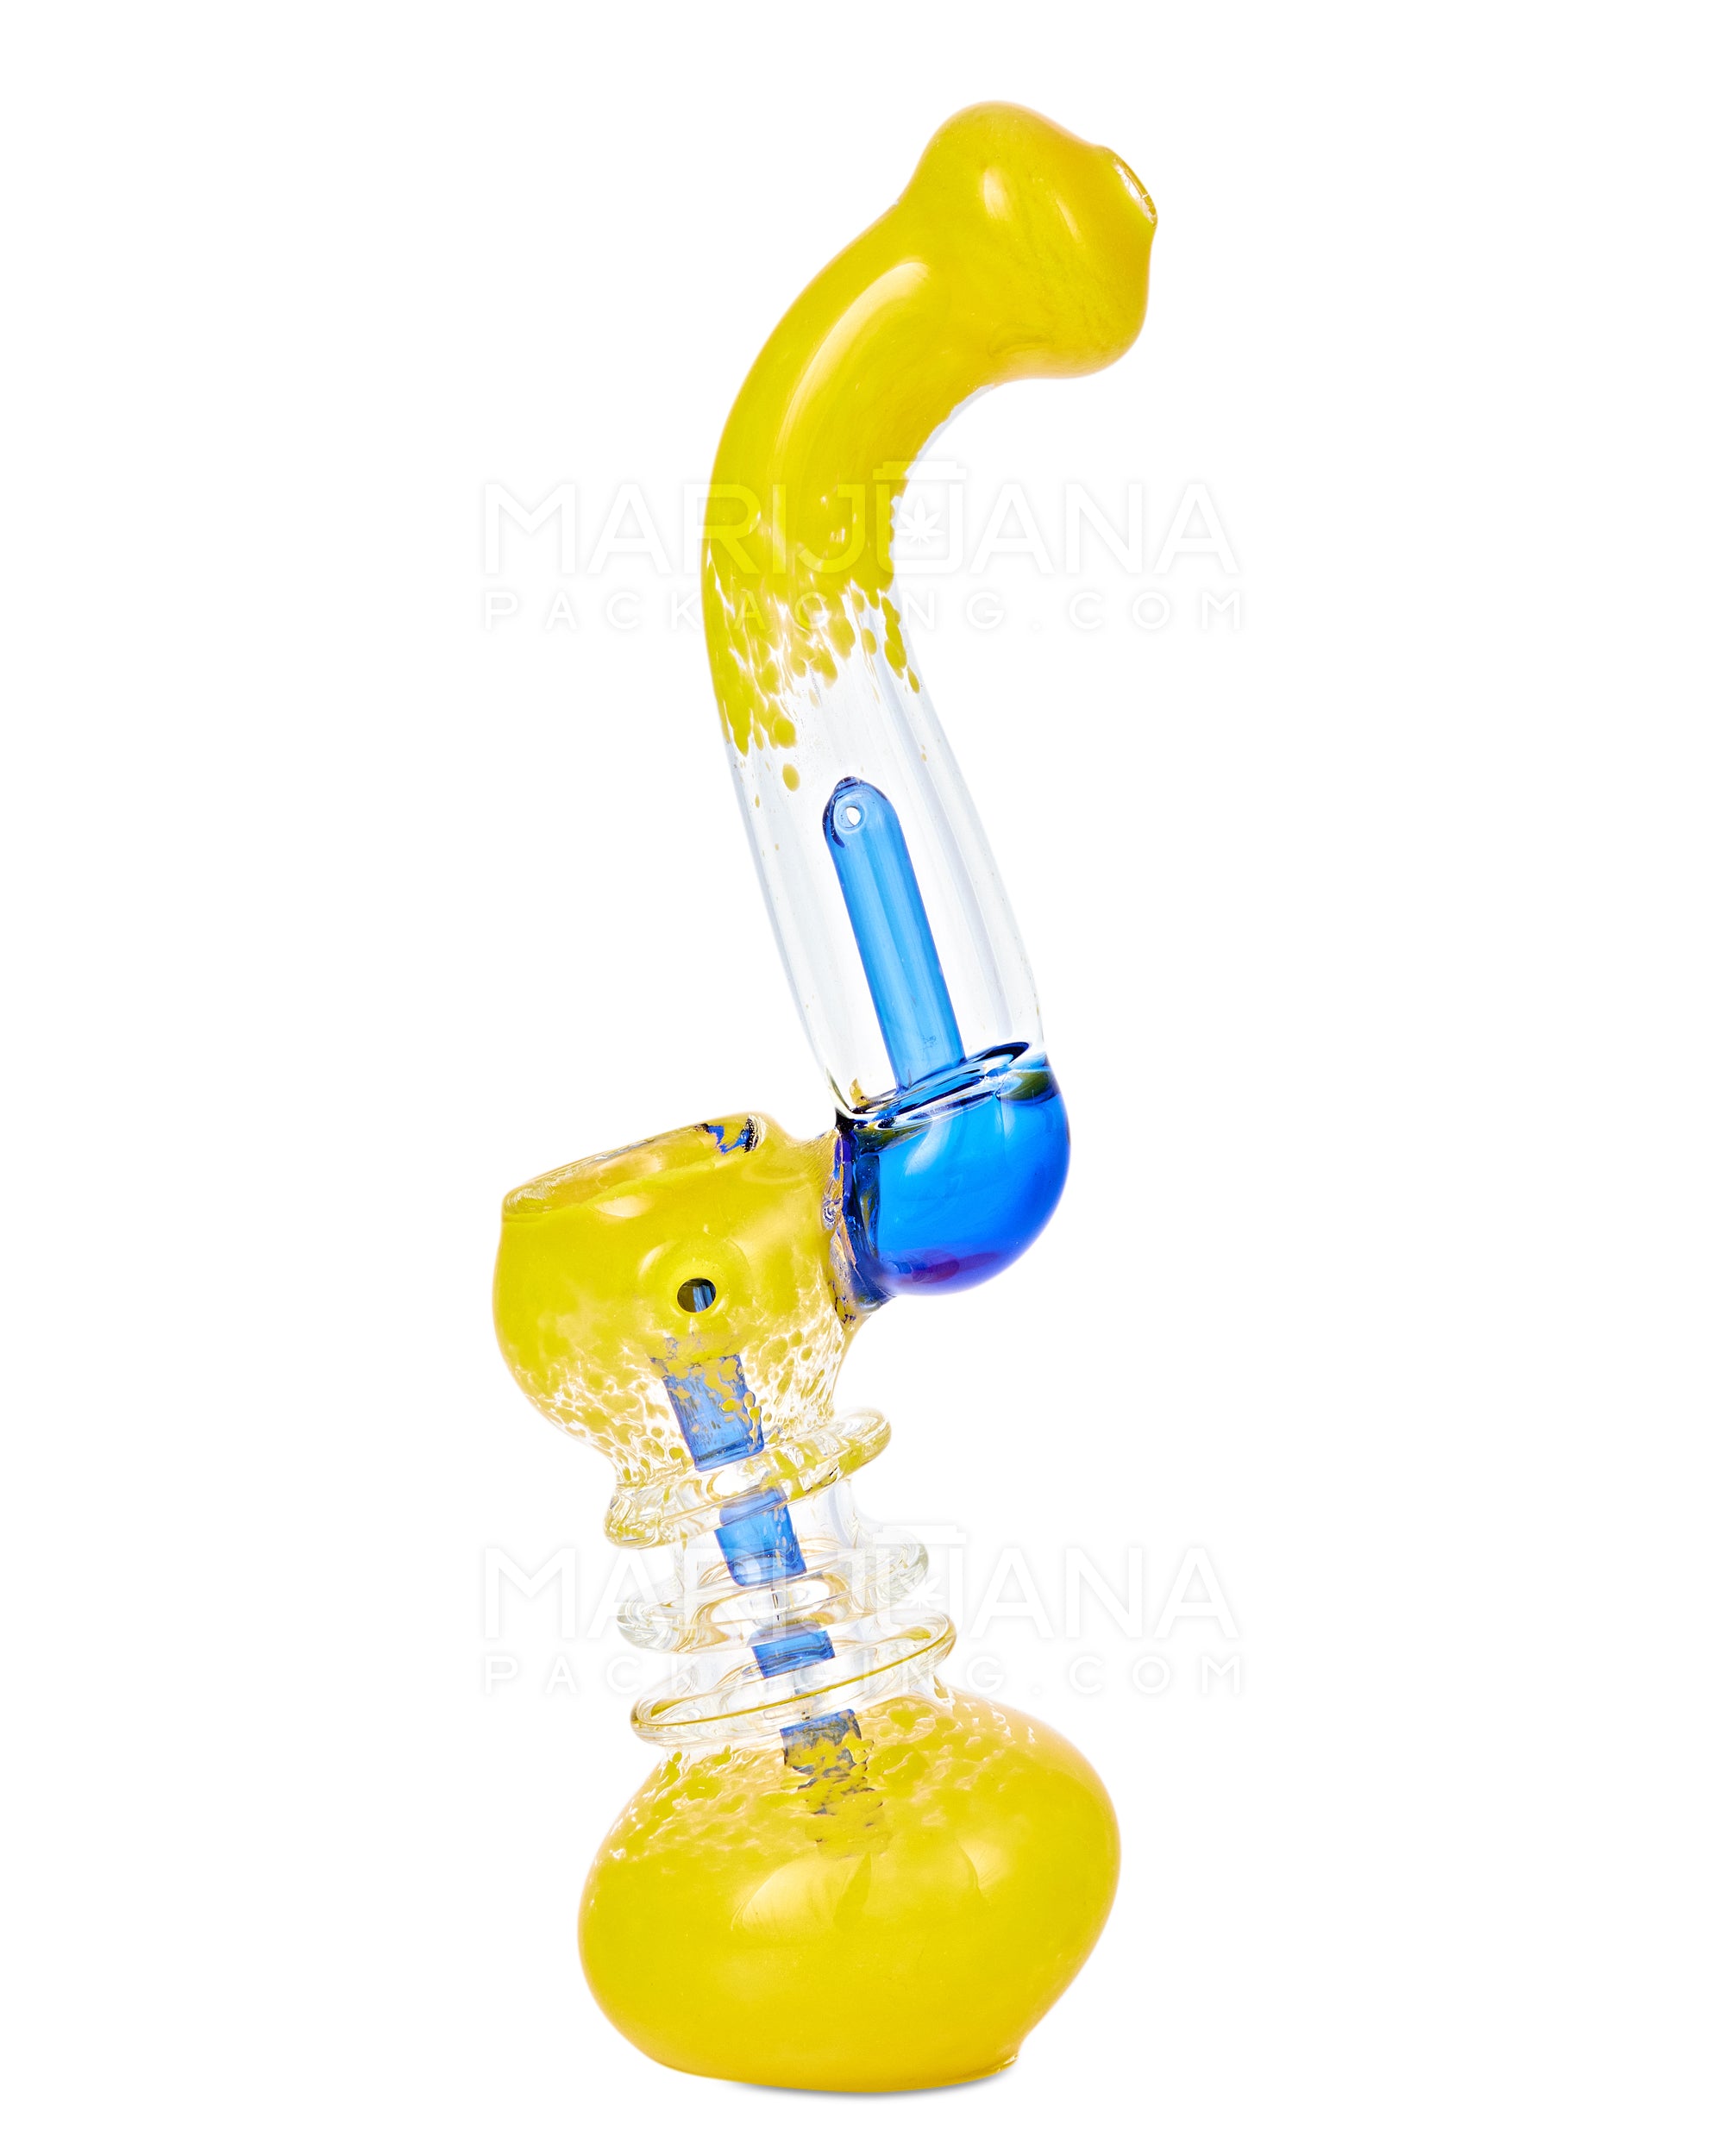 Frit Glass Ringed Bubbler w/ Diffused Perc | 7in Tall - Glass - Yellow & Blue - 4